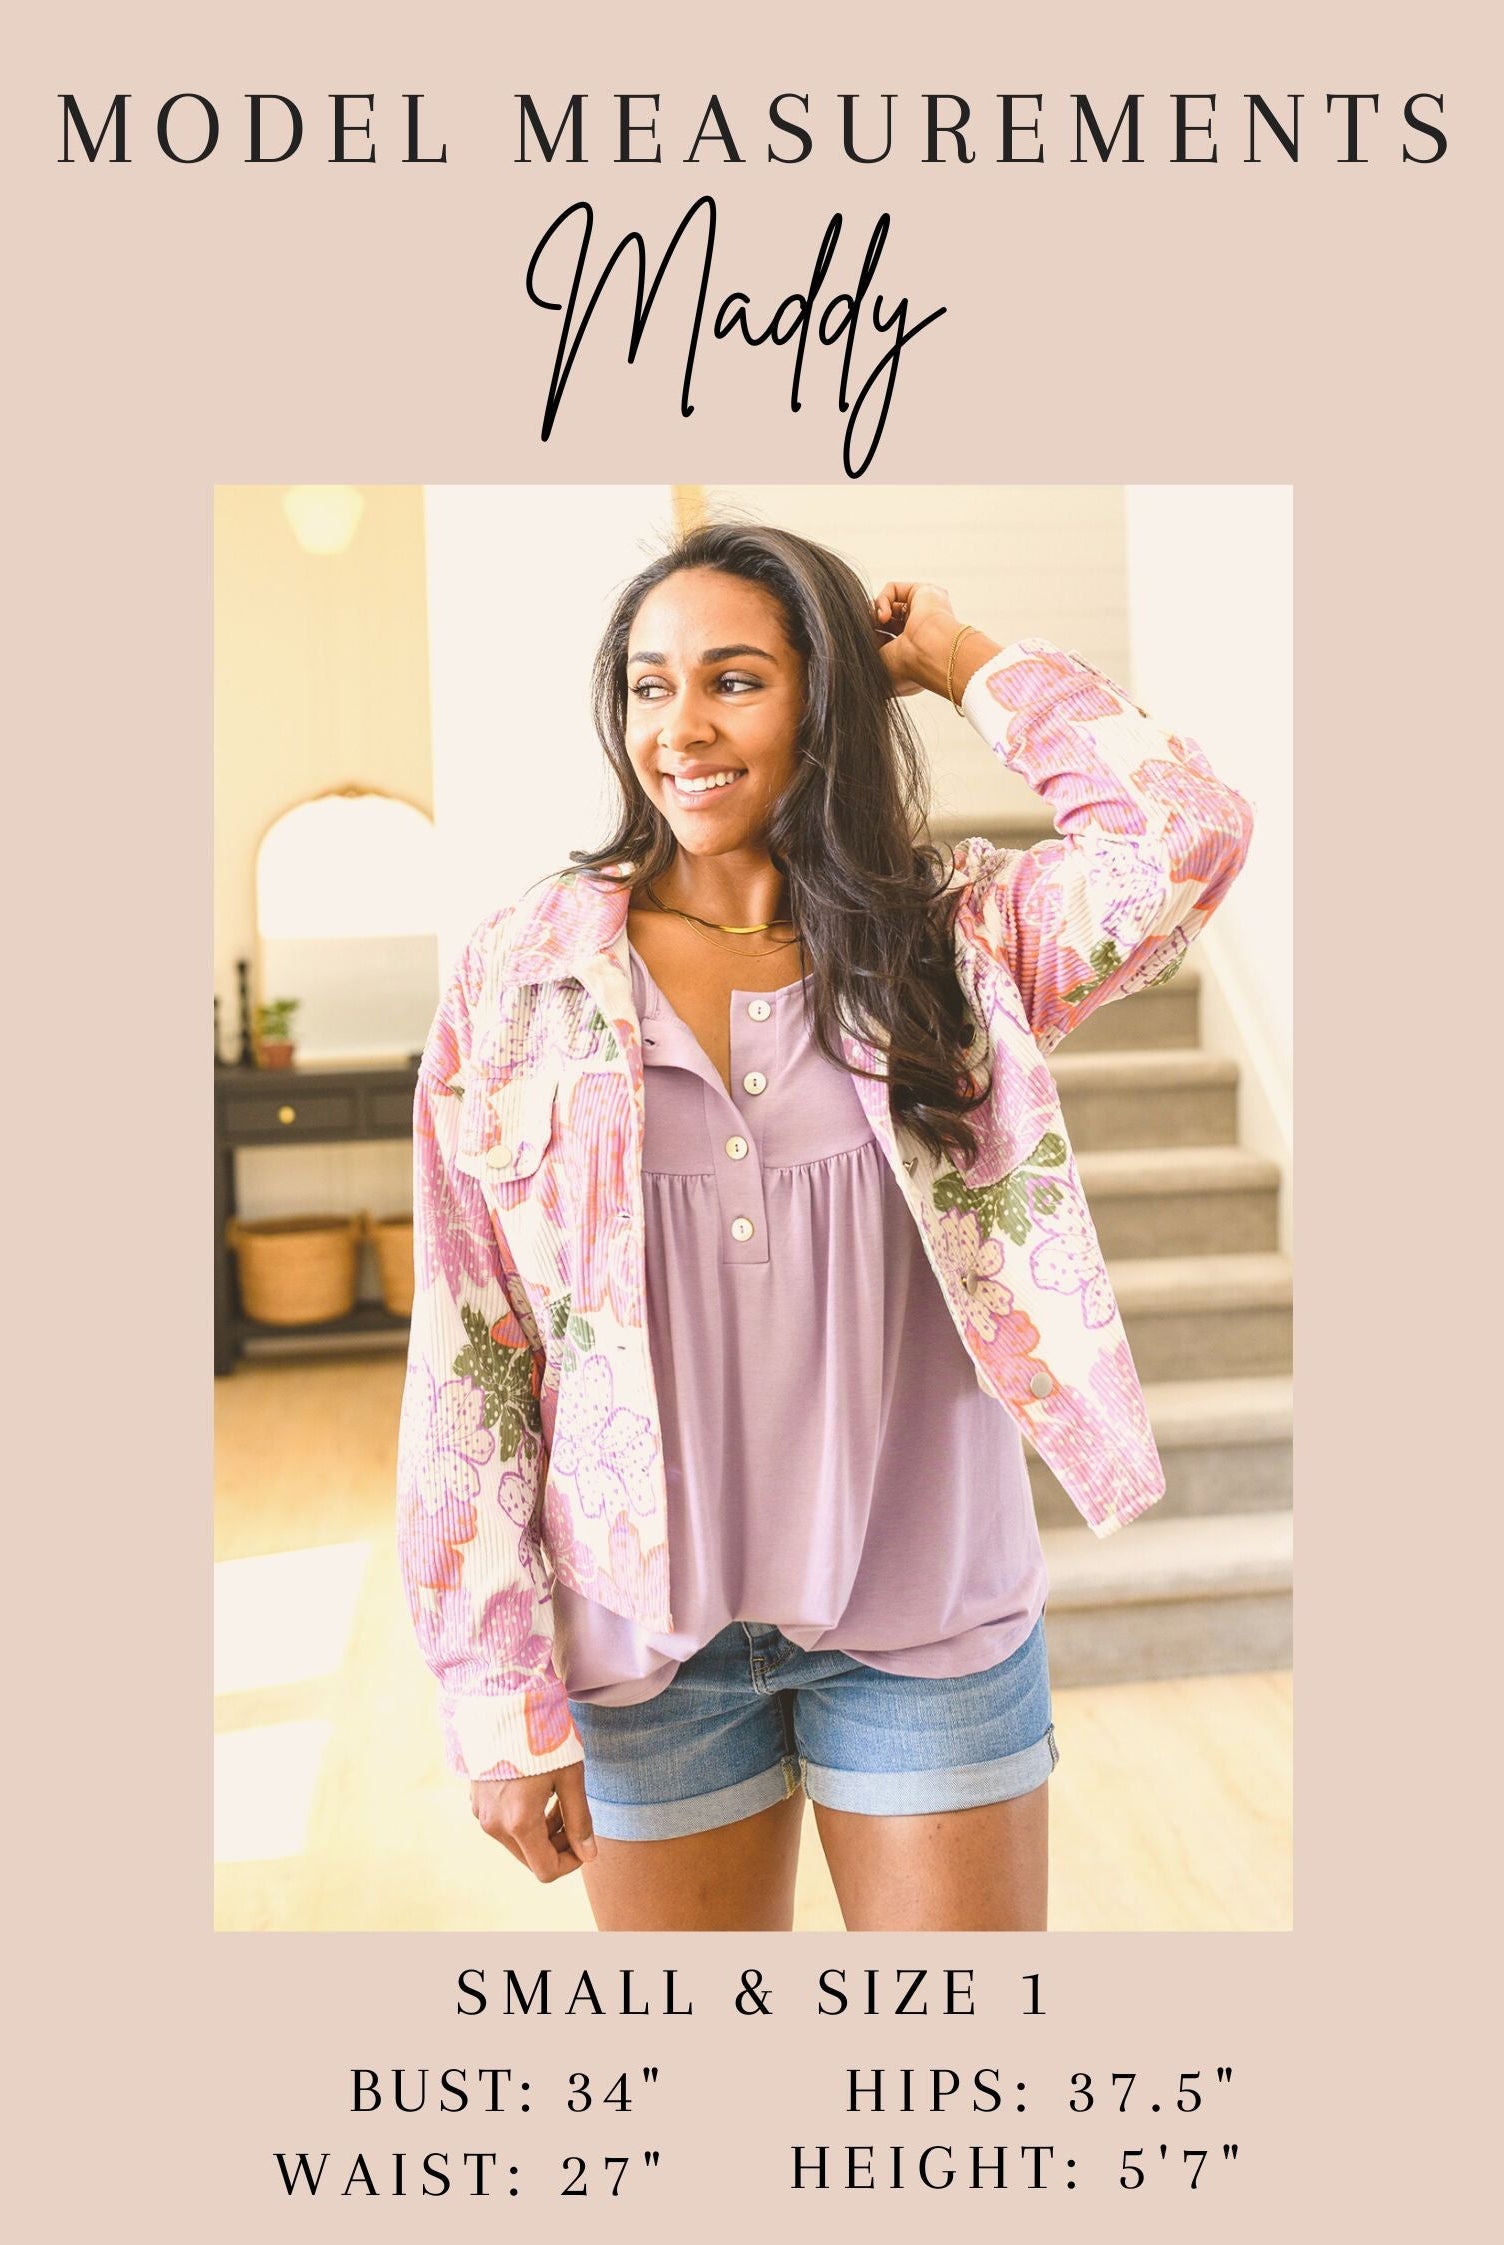 Hawaii's Finest Floral Top-Short Sleeve Tops-Krush Kandy, Women's Online Fashion Boutique Located in Phoenix, Arizona (Scottsdale Area)